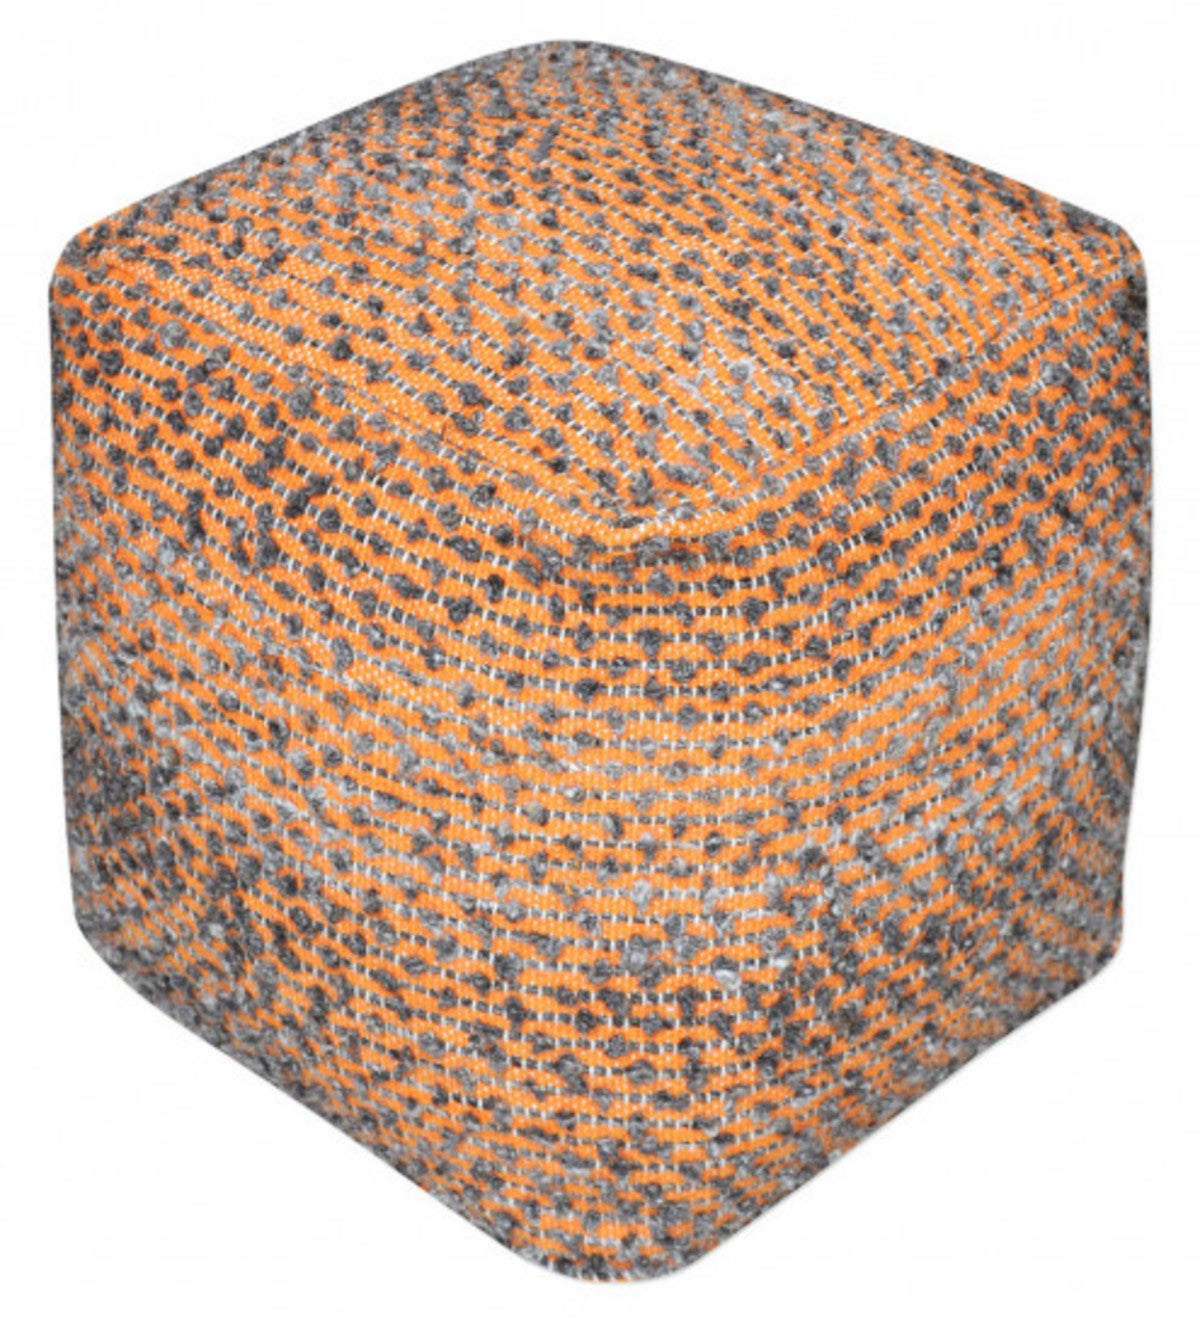 Handwoven Cotton and Wool Cube Pouf, 18" sq - Burnt Orange